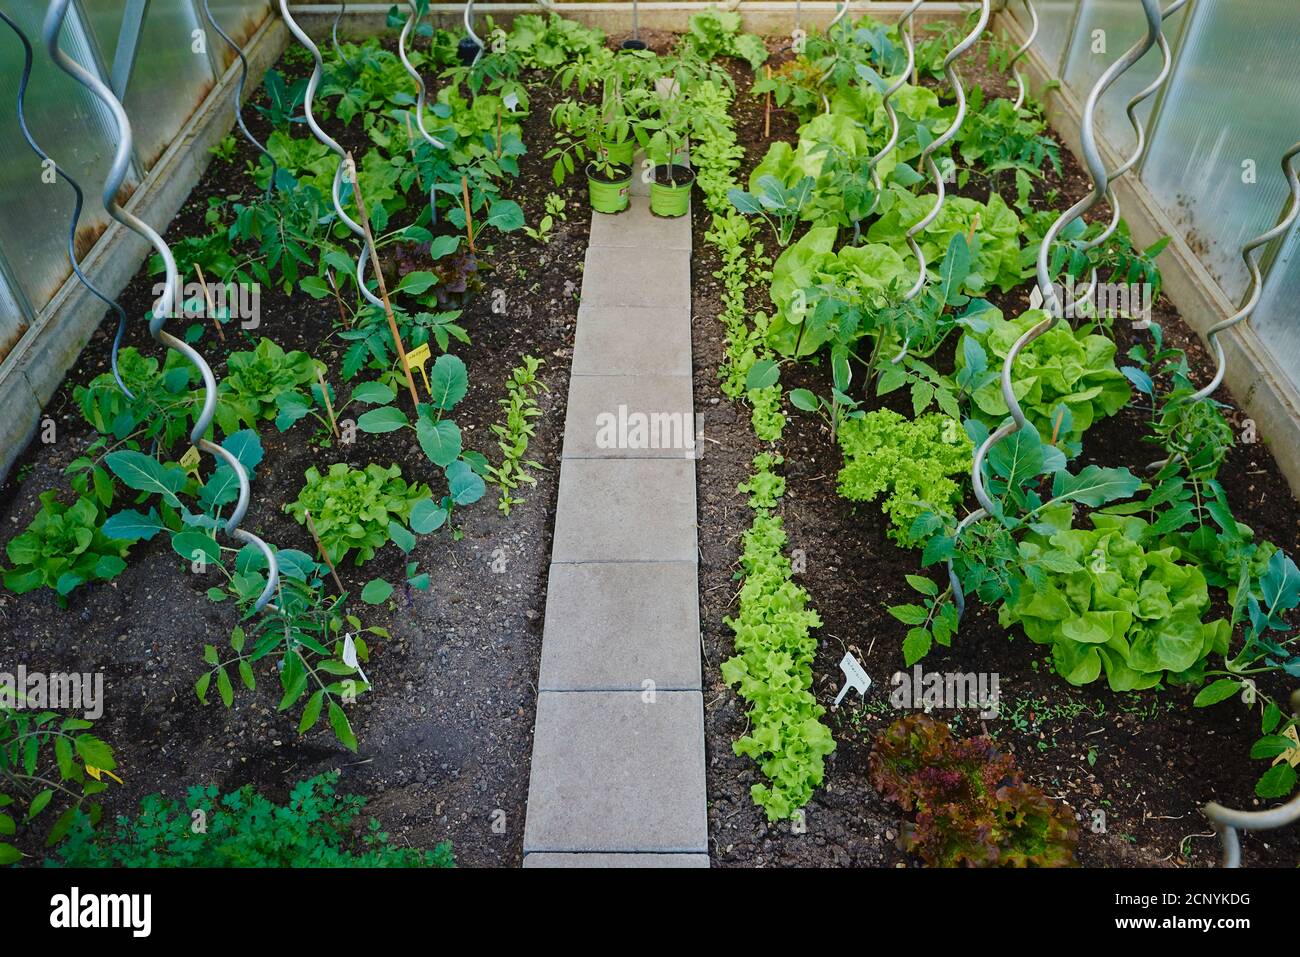 Vegetable patch, greenhouse, plants, overview shot Stock Photo